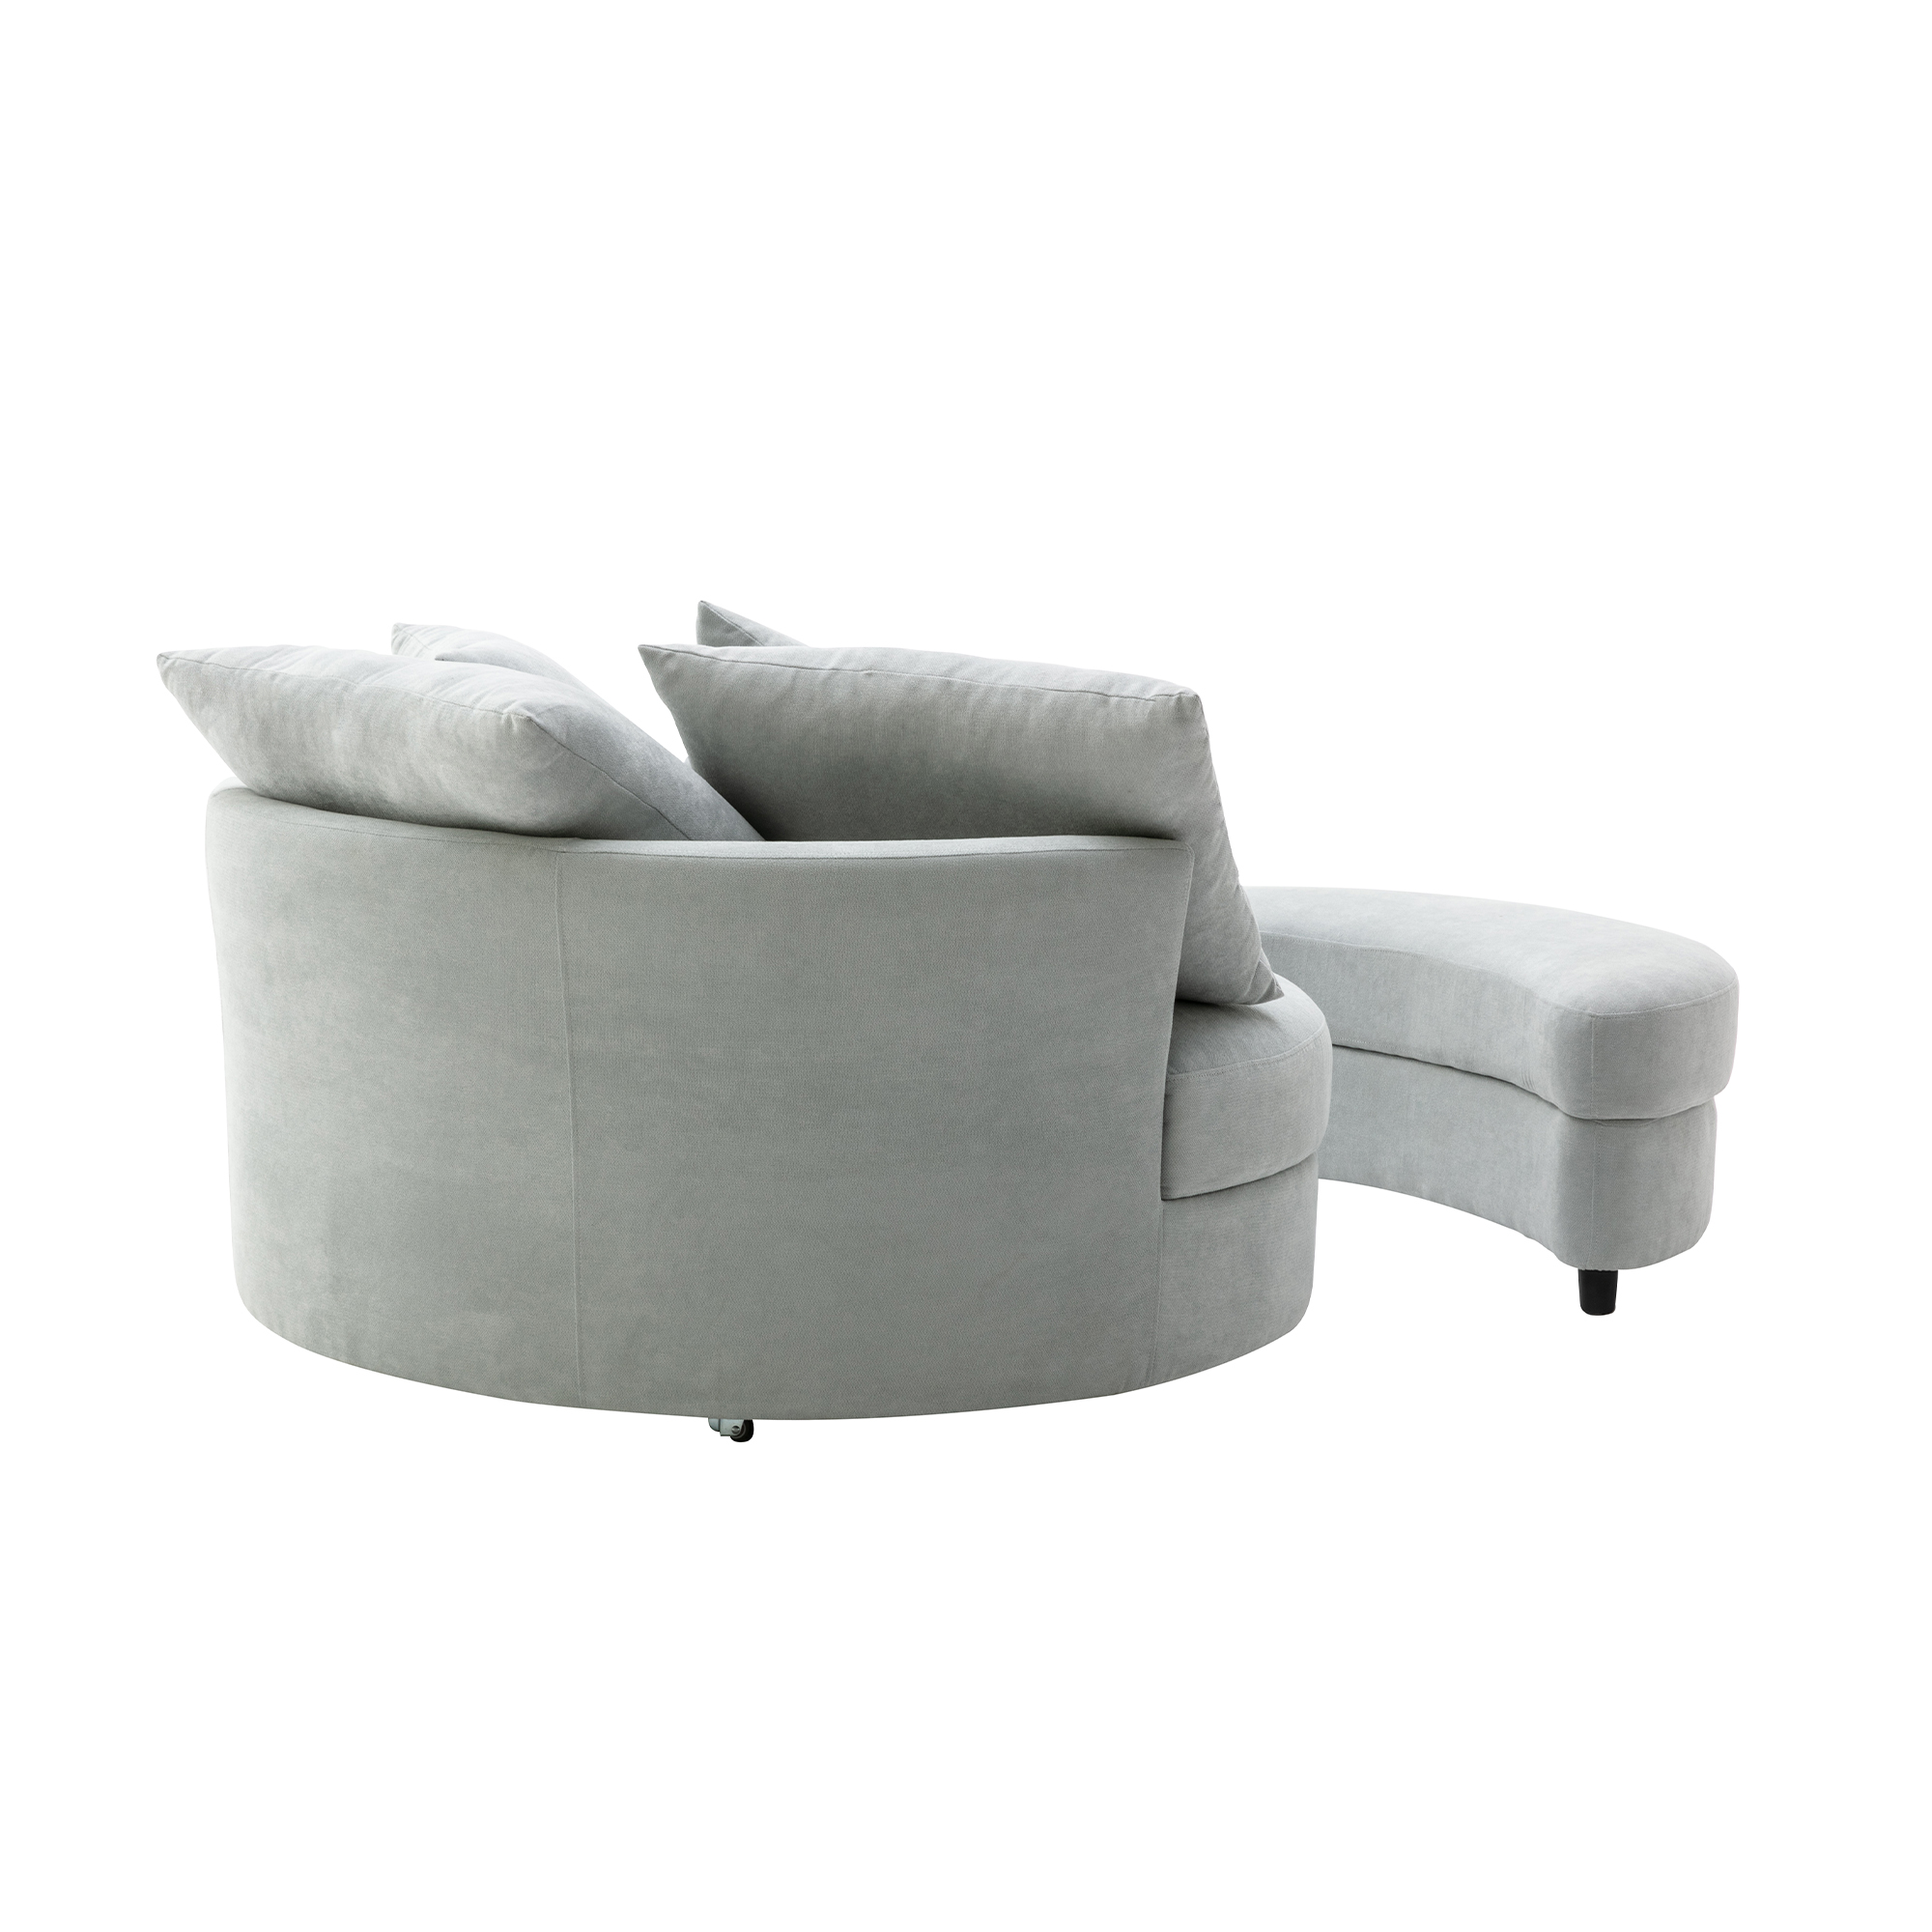 360° Swivel Accent Barrel Chair with Storage Ottoman & 4 Pillows - PP284472AAA